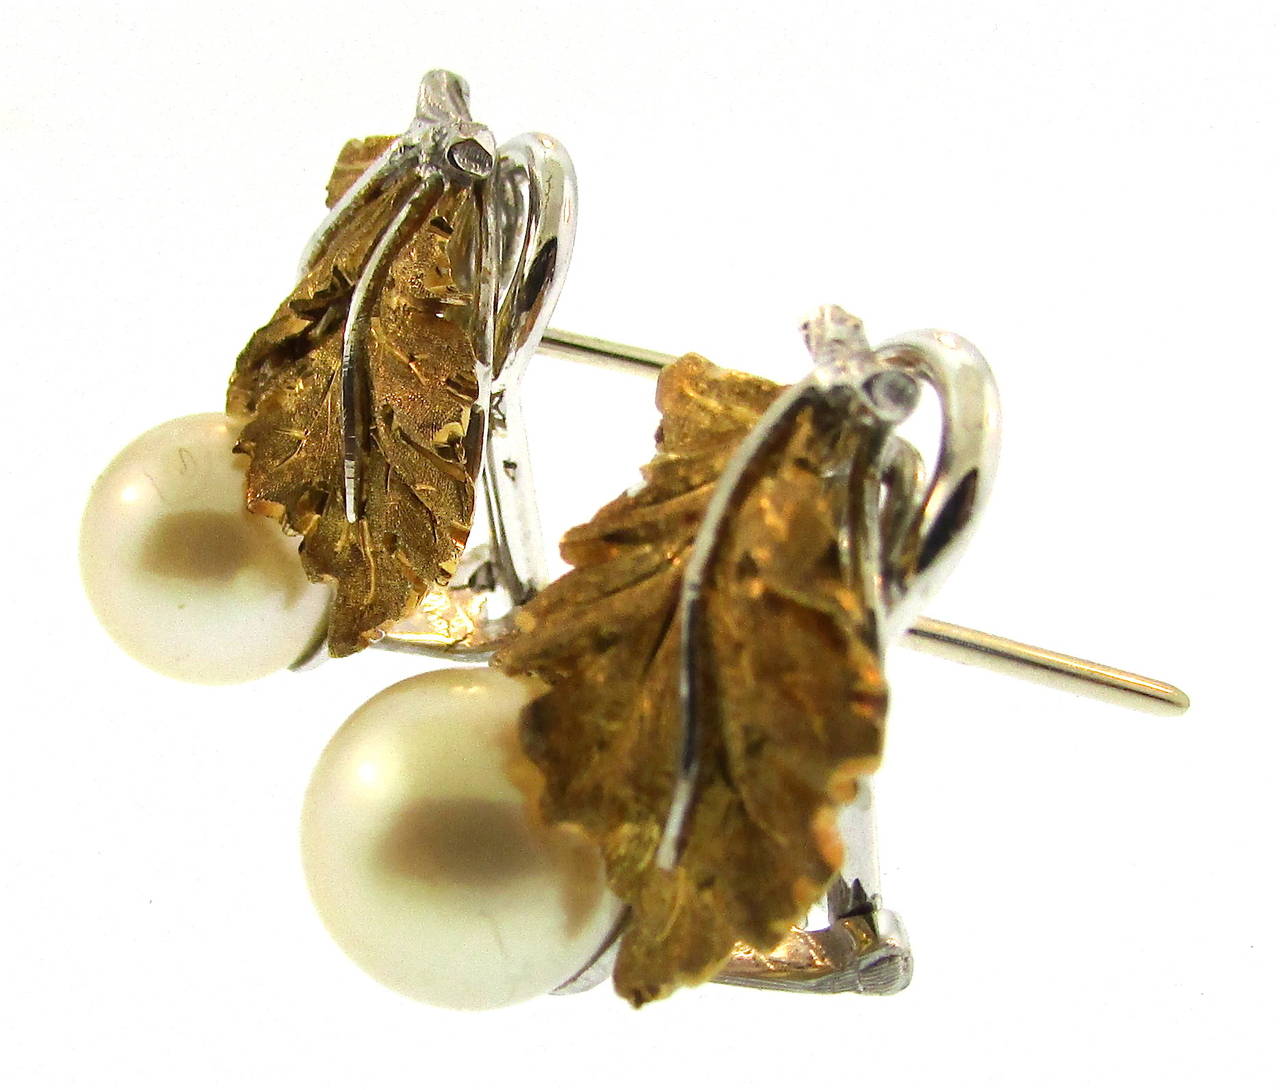 Buccellati pearl with 18k gold leaf motif earrings.  Made in Italy, circa 1960. Signed by Buccellati.